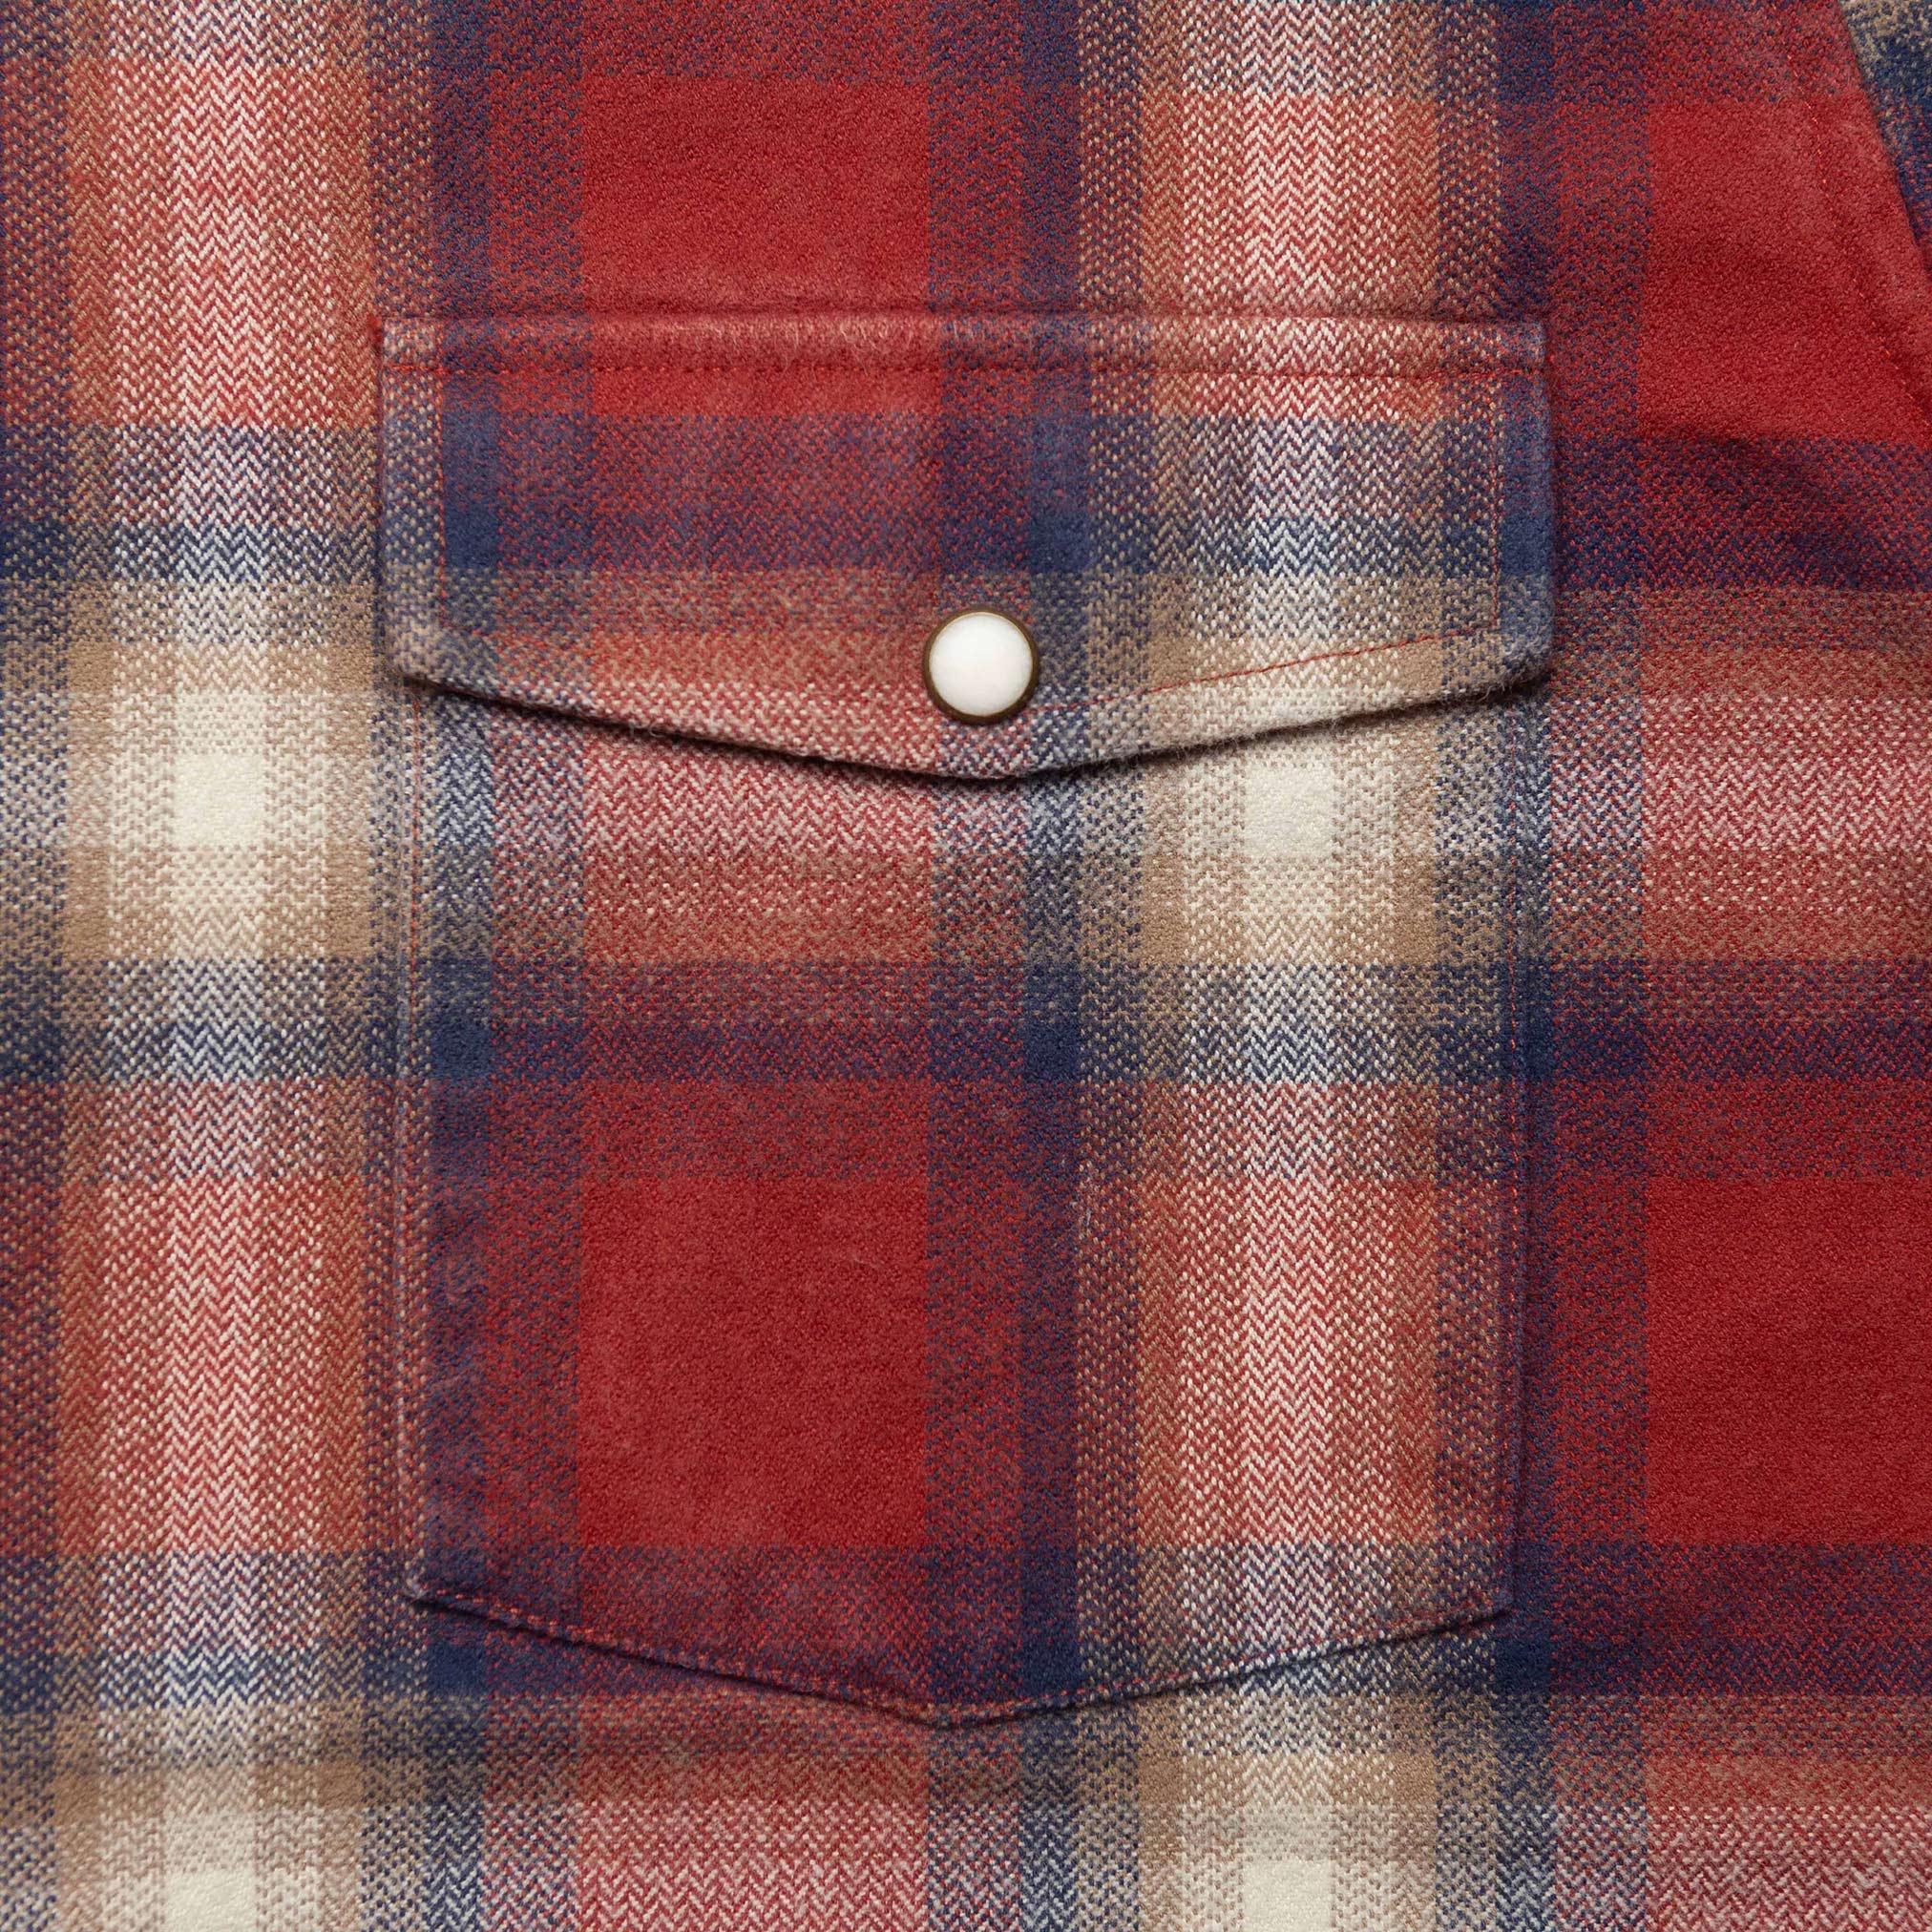 The Glacier Shirt in Red Plaid - 46